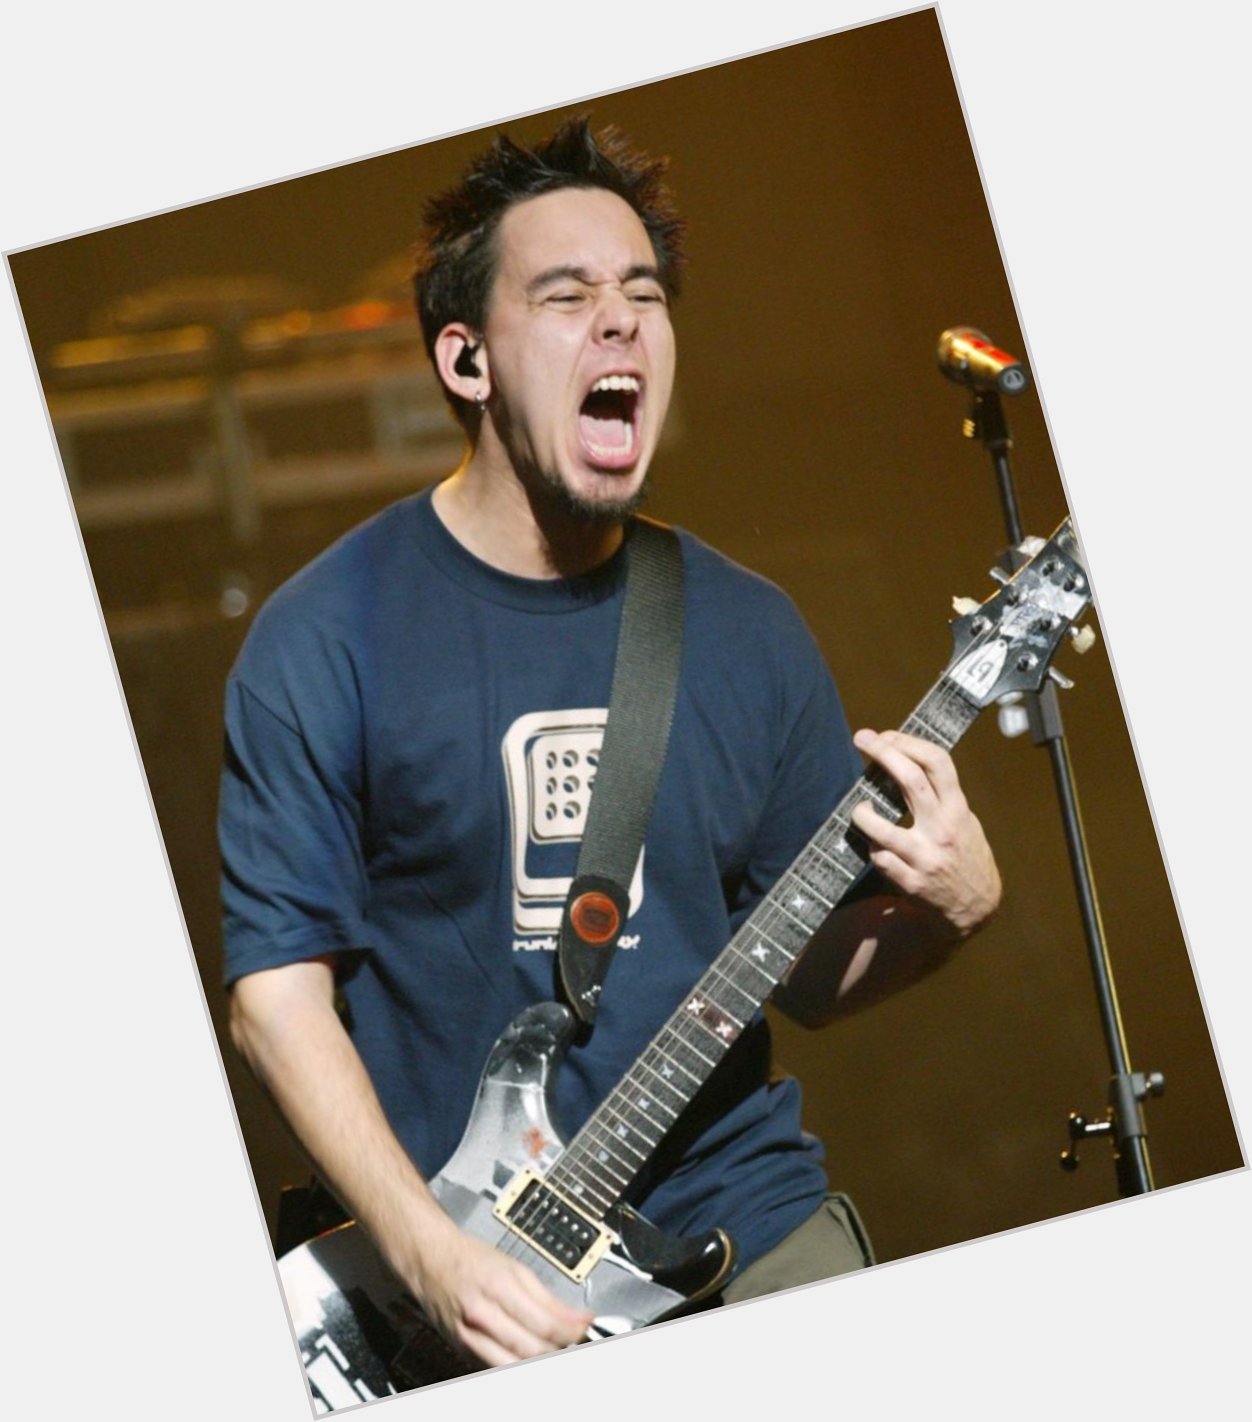 Happy birthday to Mike Shinoda. One of the founding members and biggest creative contributors of Linkin Park! 